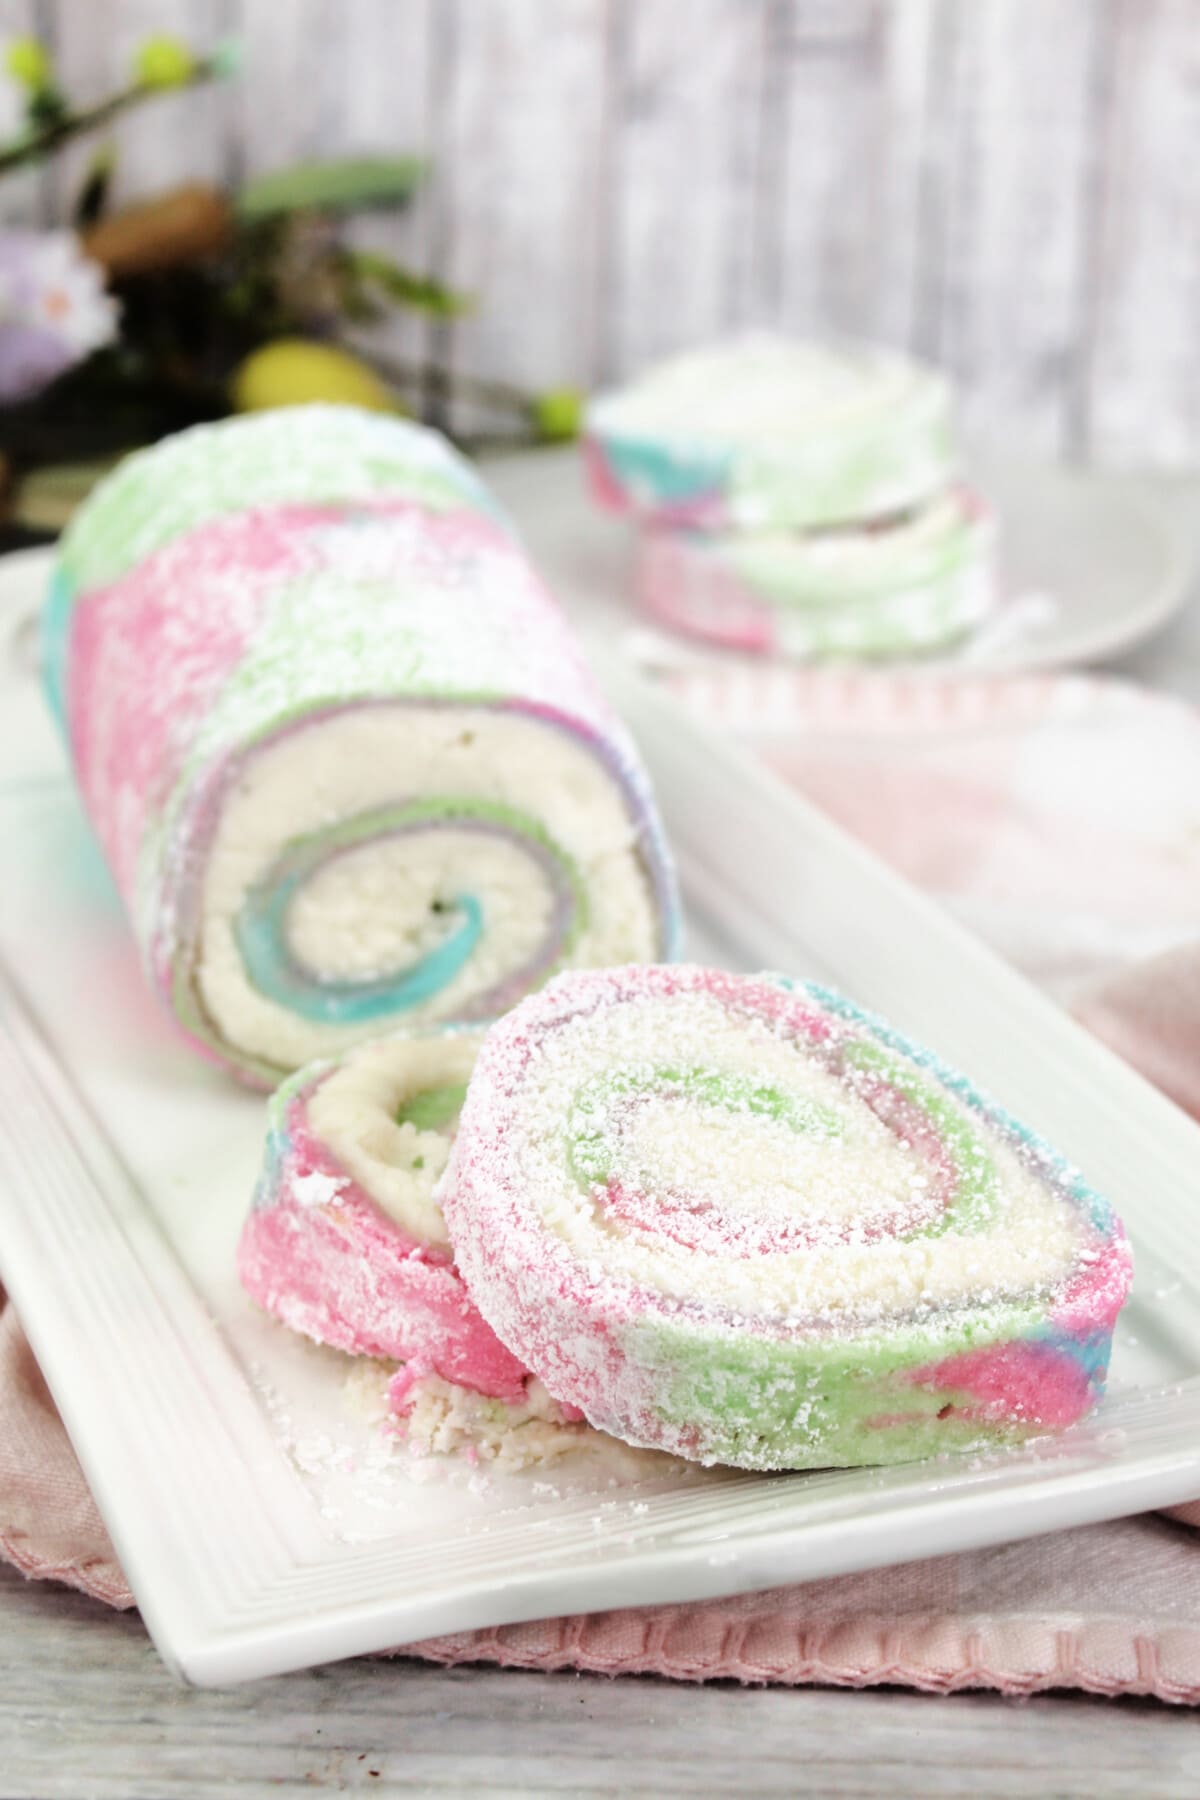 The Easter Cake Roll cut into slices.